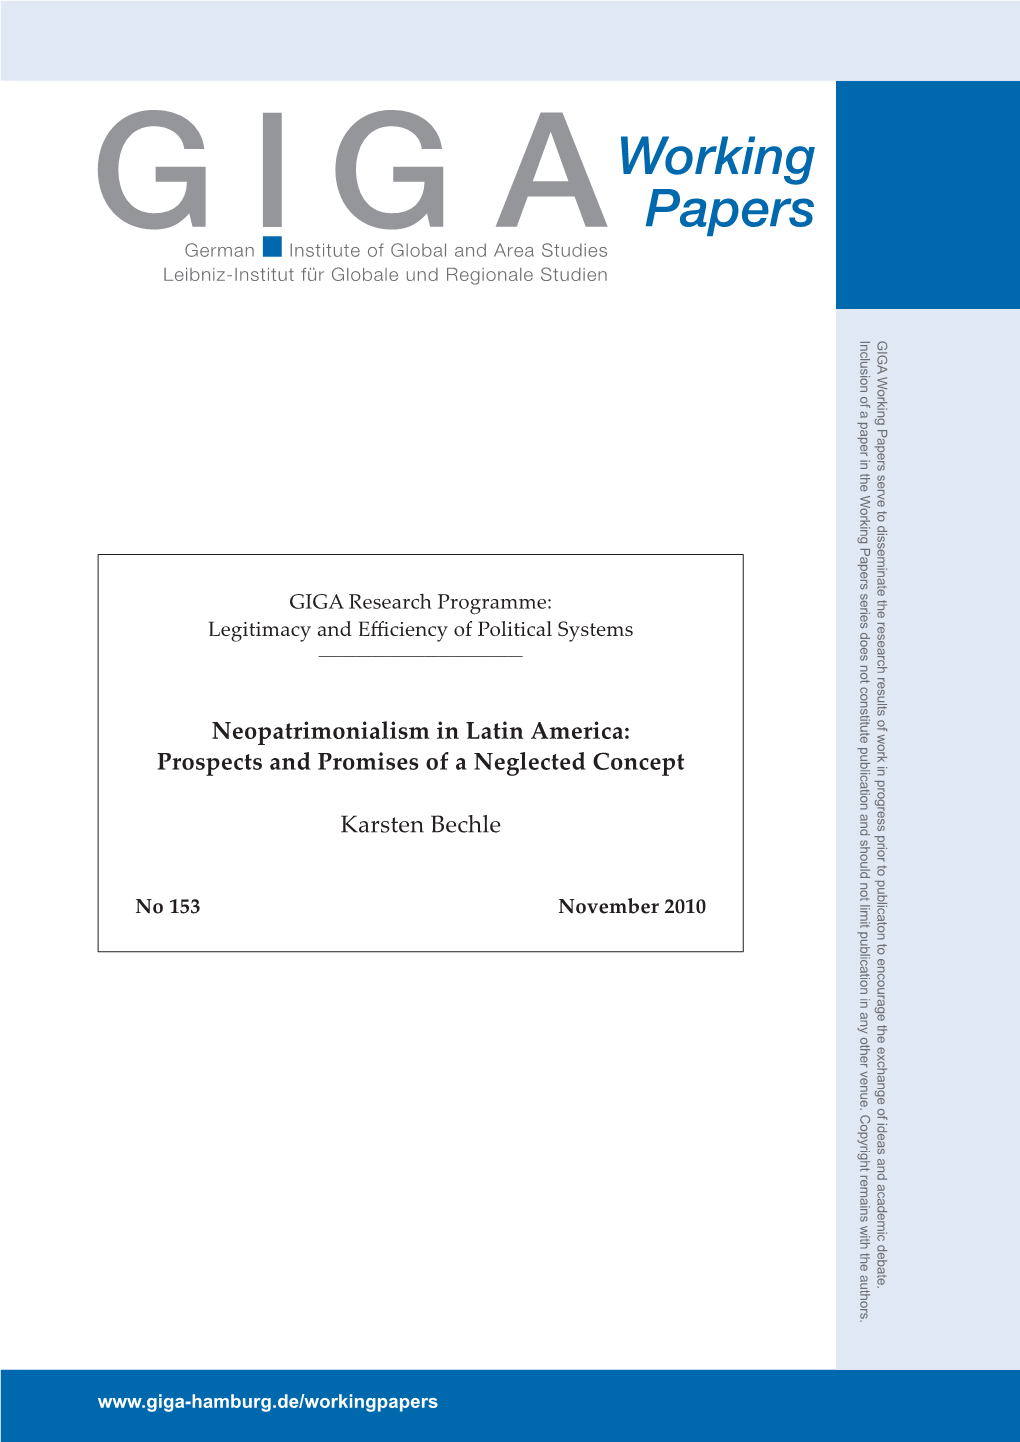 Neopatrimonialism in Latin America: Prospects and Promises of a Neglected Concept